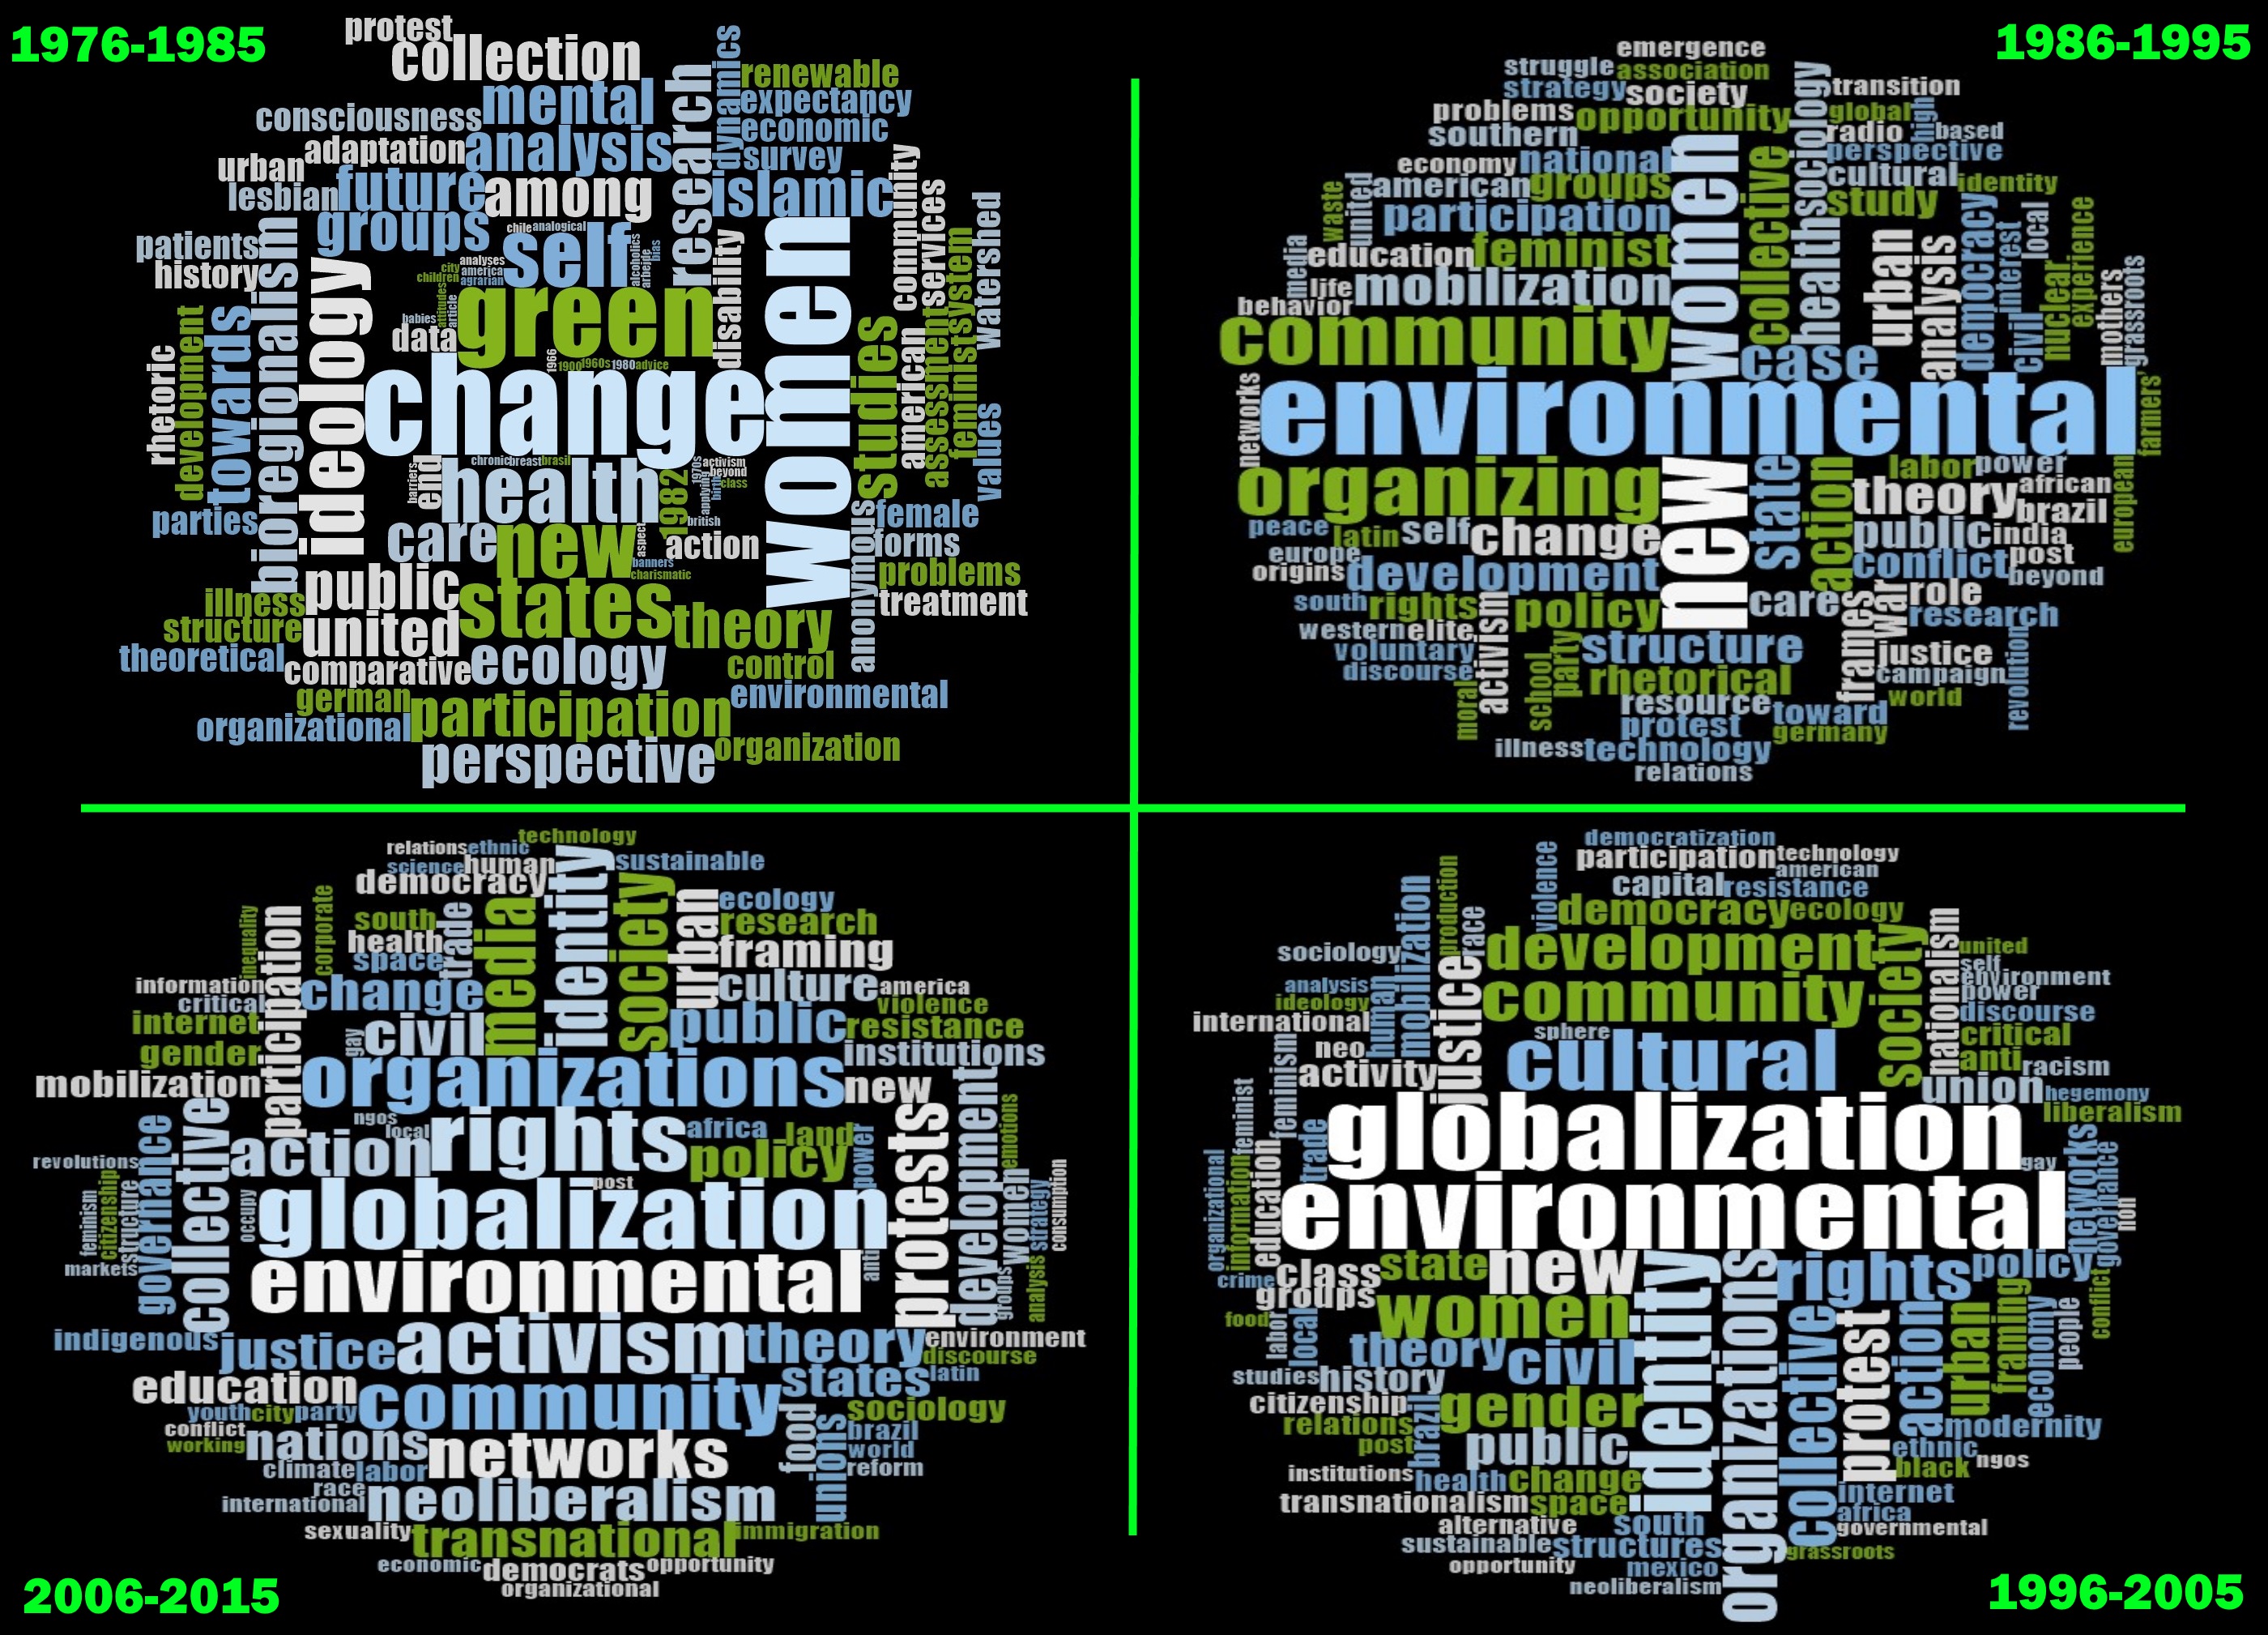 A Word cloud of four decades of movements-related keywords